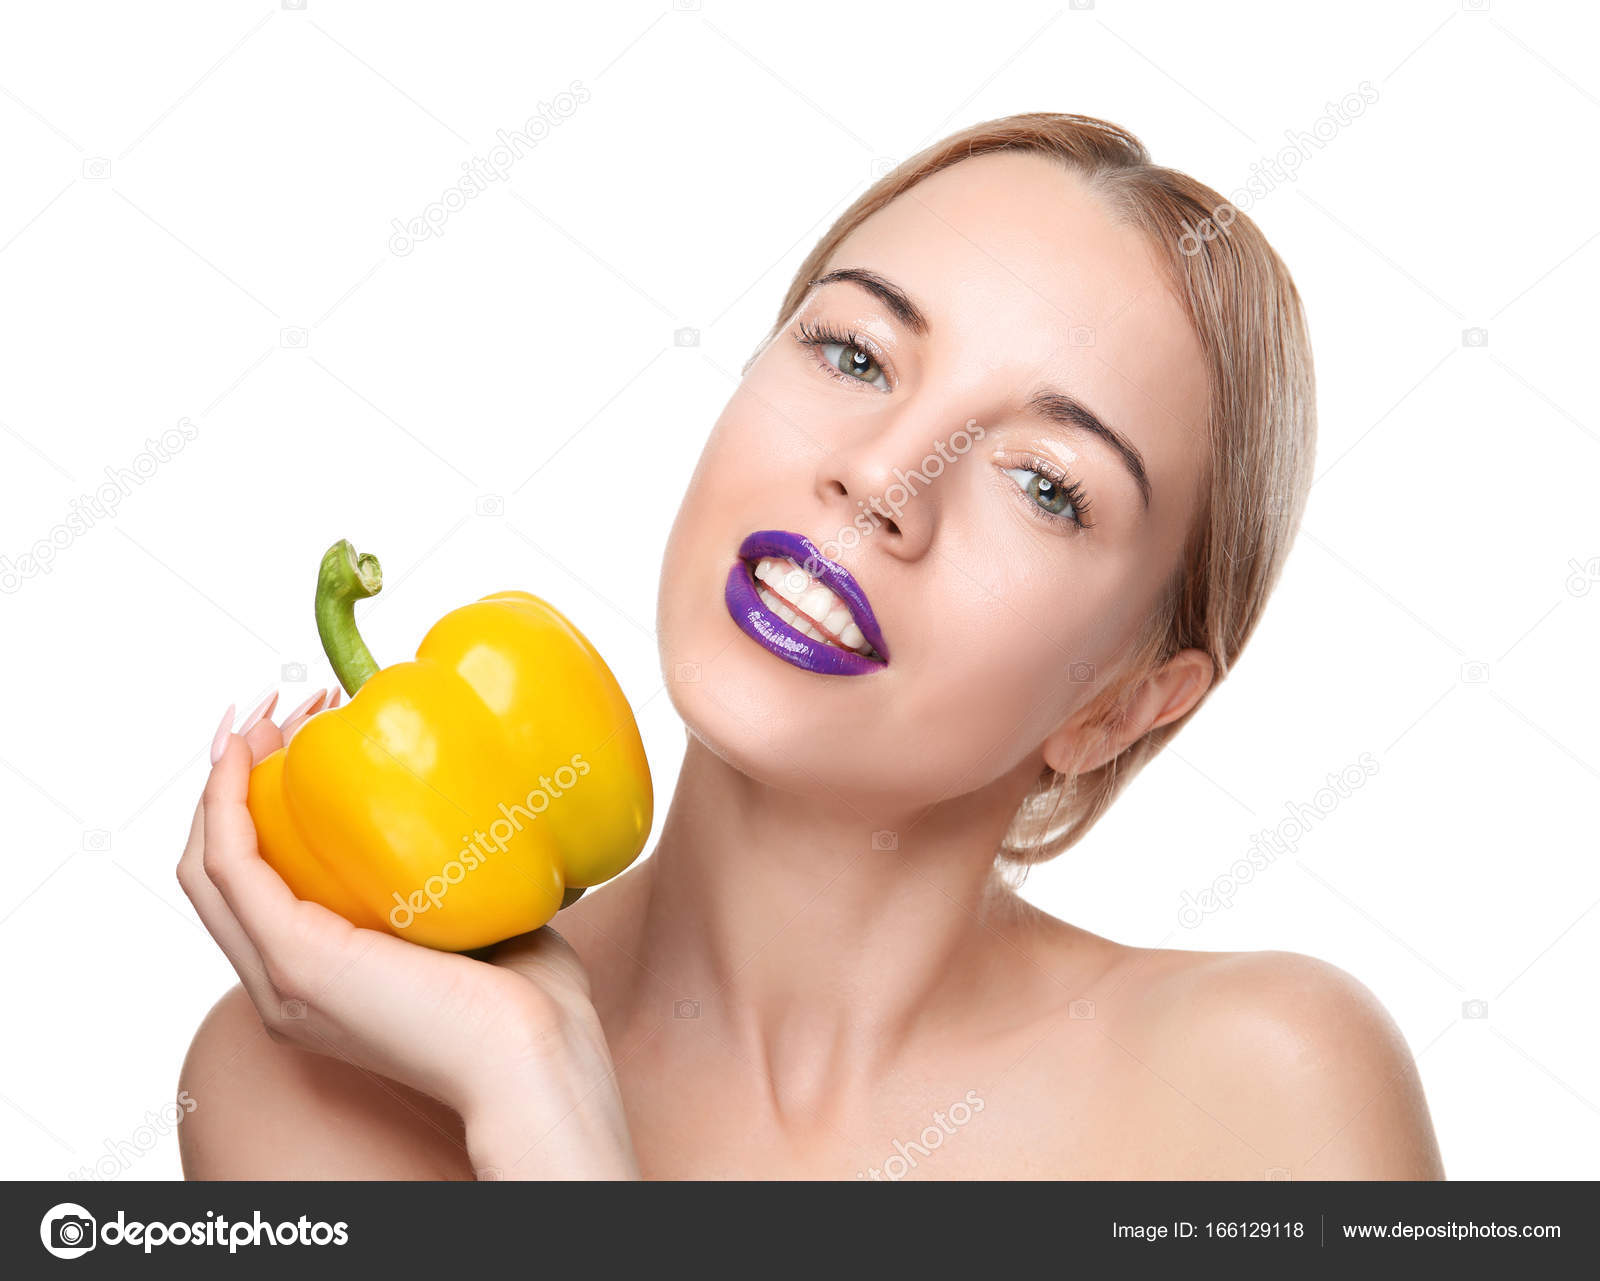 Young woman holding bell pepper — Stock Photo © belchonock #166129118